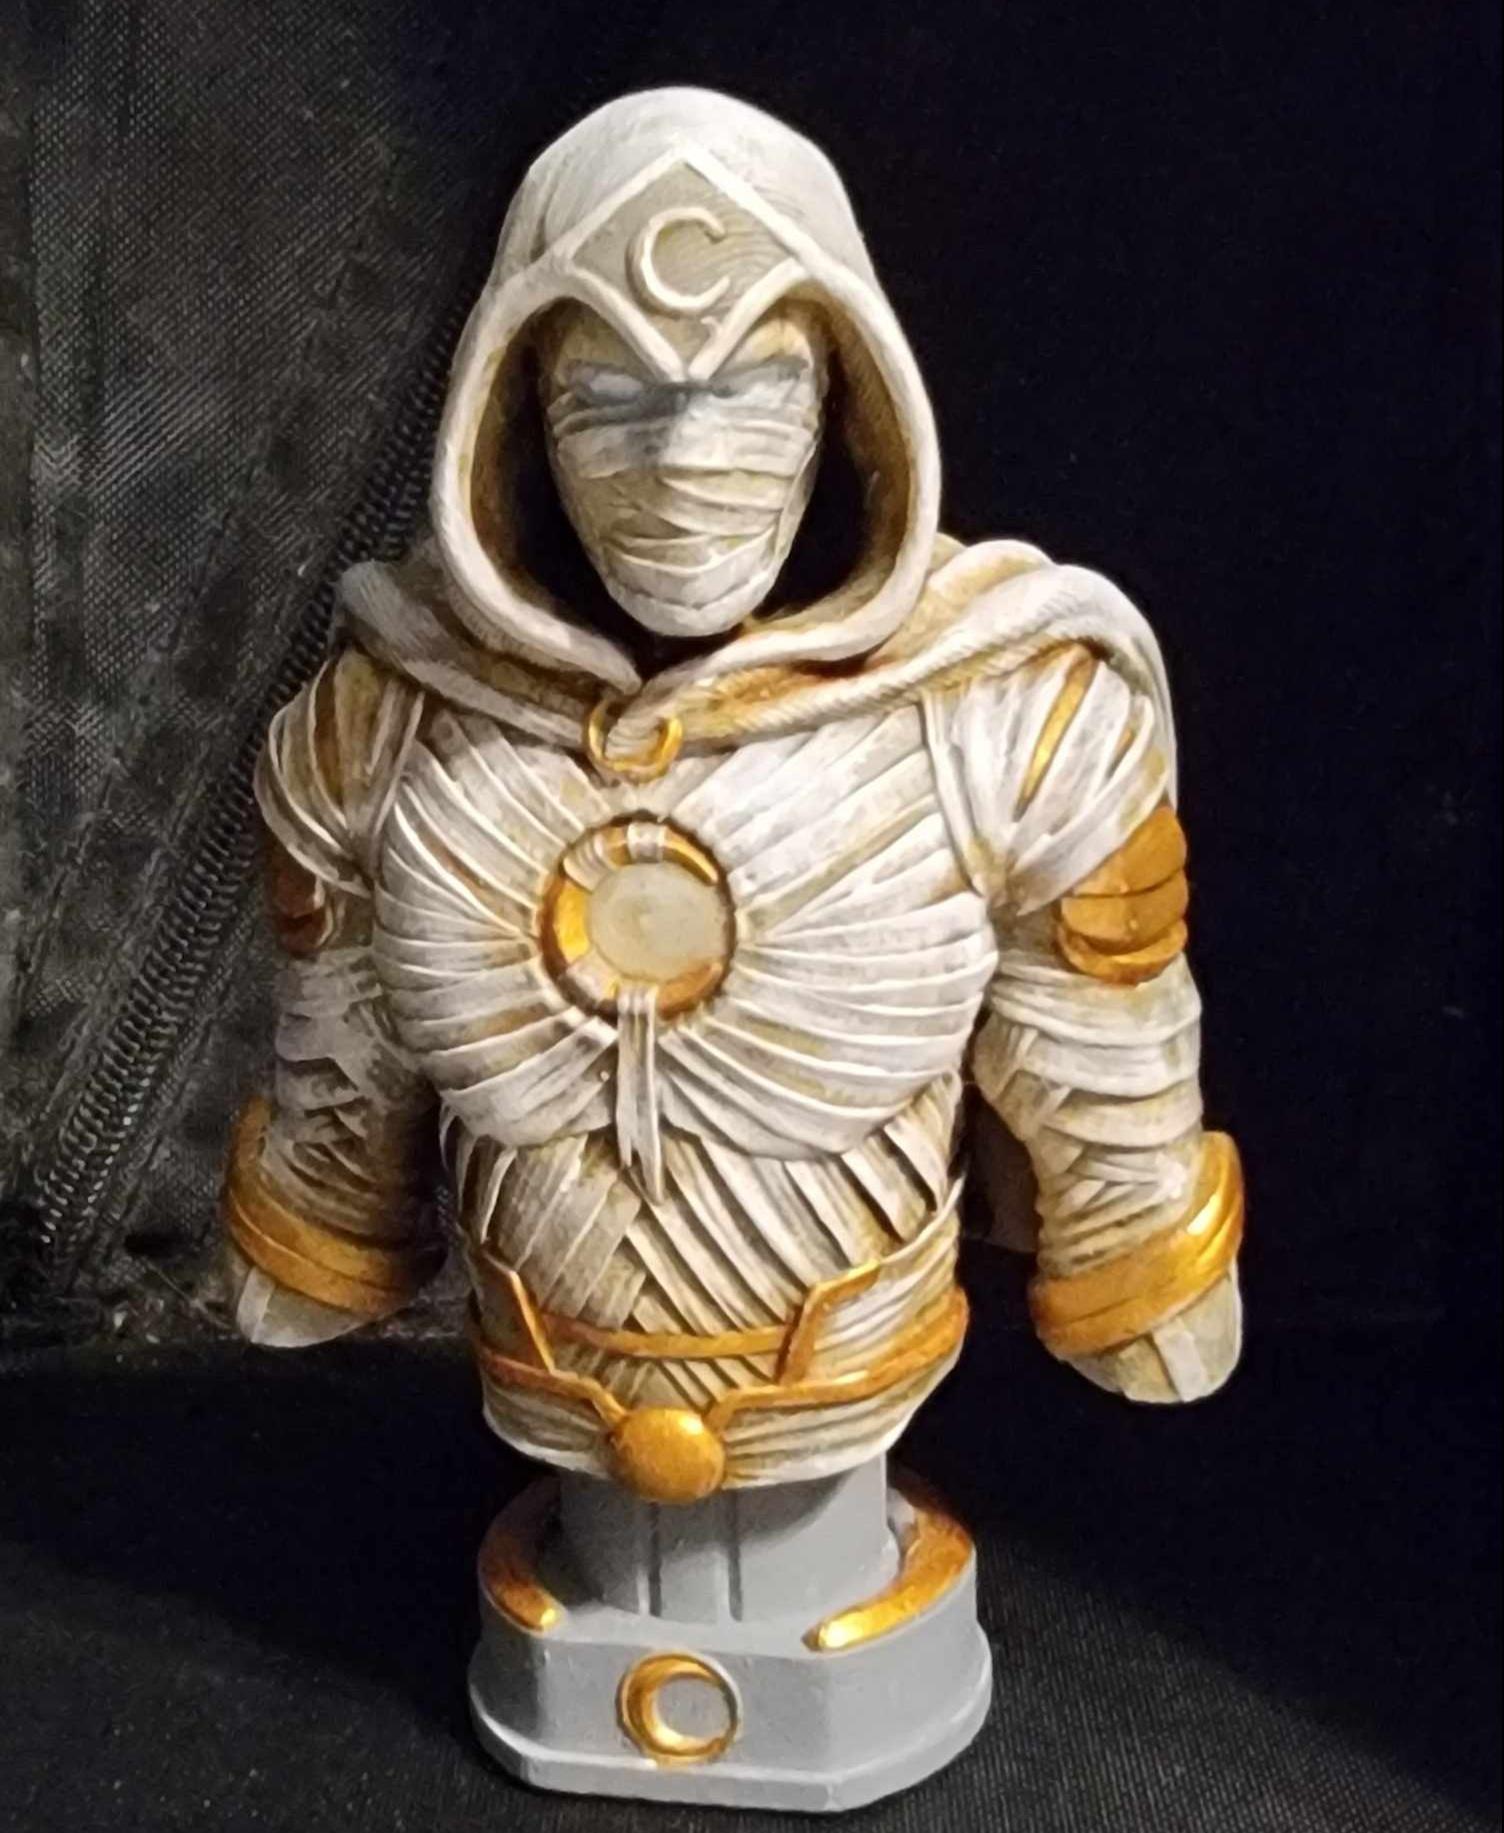 Moon Knight (Pre-Supported) - Always been a Moon Knight fan and this bust is an extremely nice model! Thank you! - 3d model